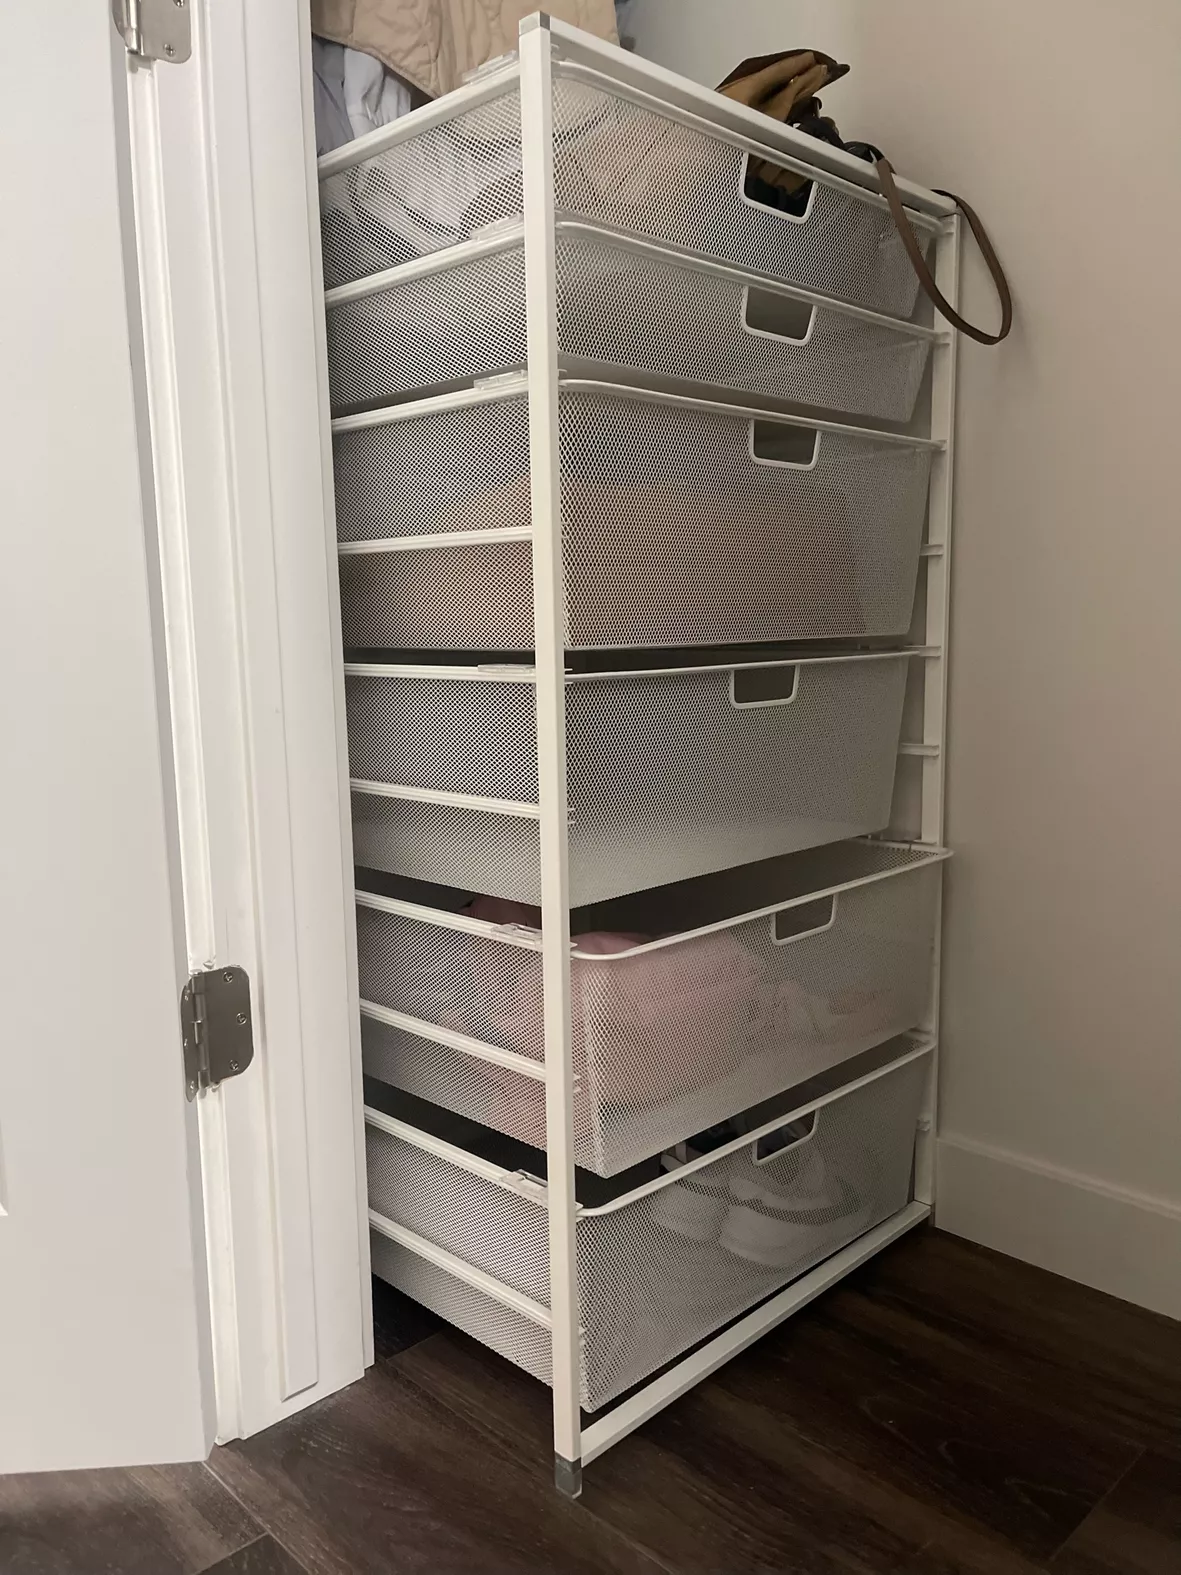 Elfa Wide Tall Drawer Solution